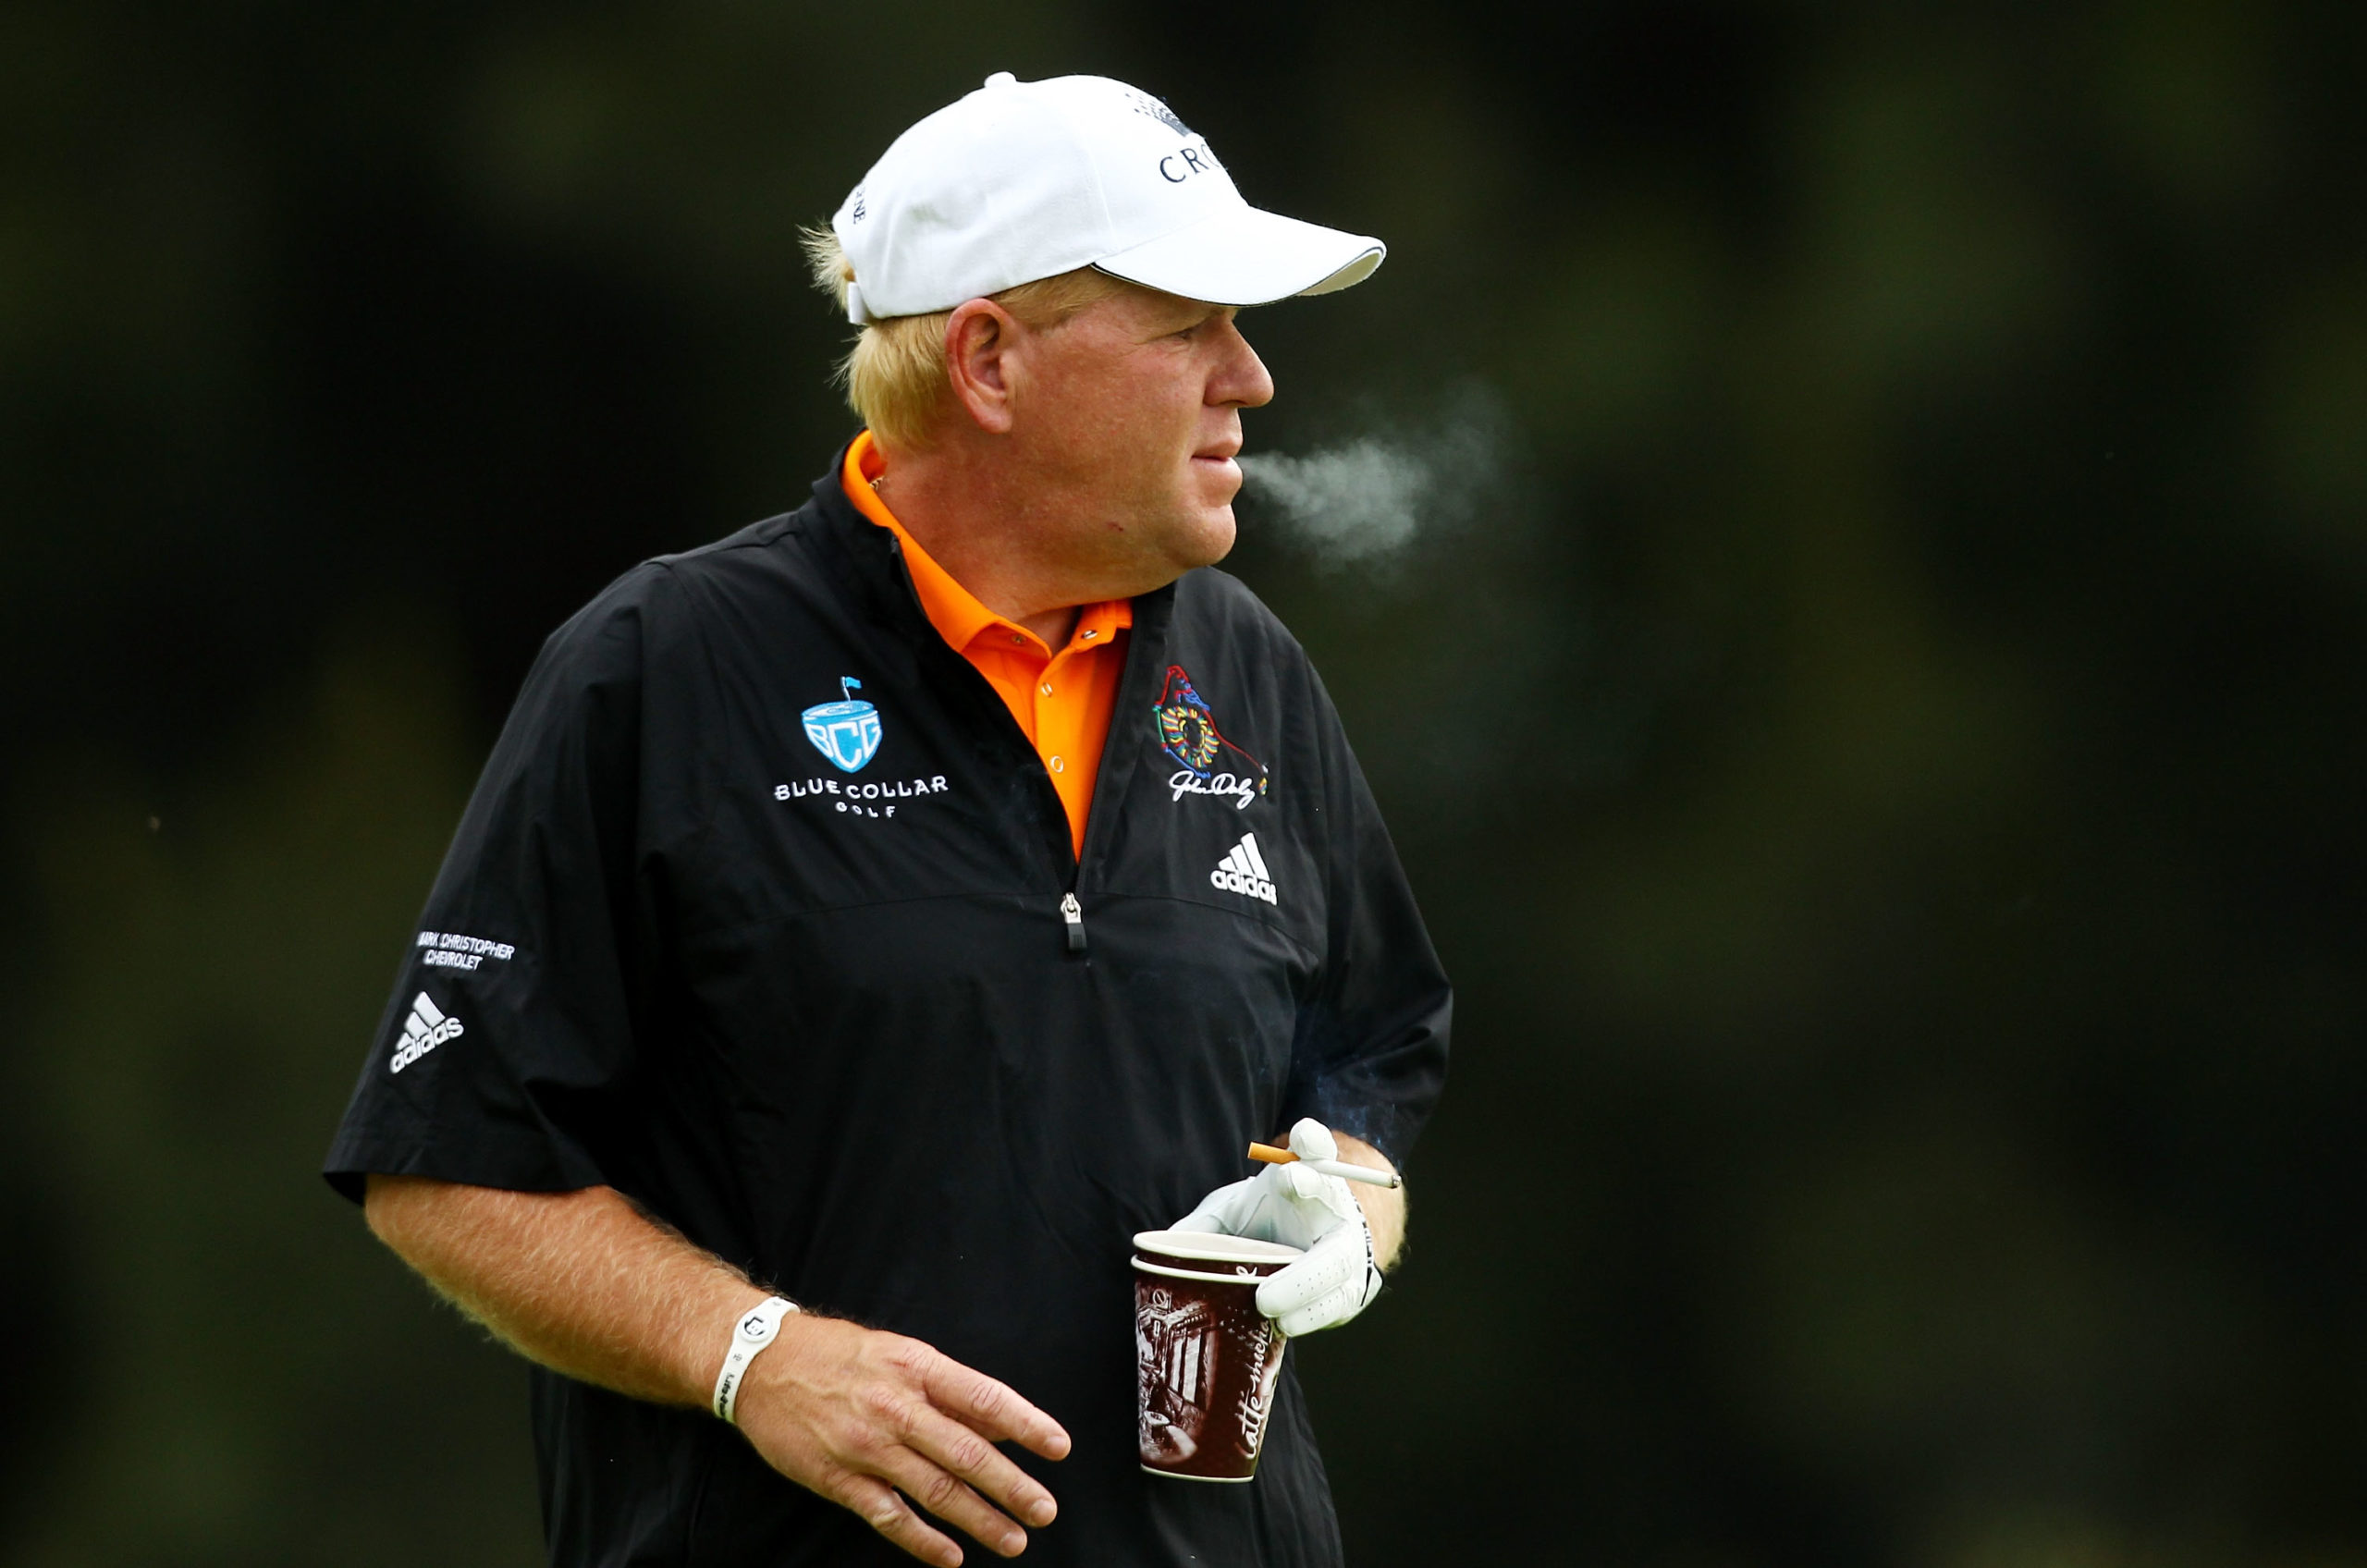 SYDNEY, AUSTRALIA - DECEMBER 02: John Daly of the United States smokes on the 14th hole during day one of the Australian Open at The Lakes Golf Club on December 2, 2010 in Sydney, Australia. Mark Nolan/Getty Images